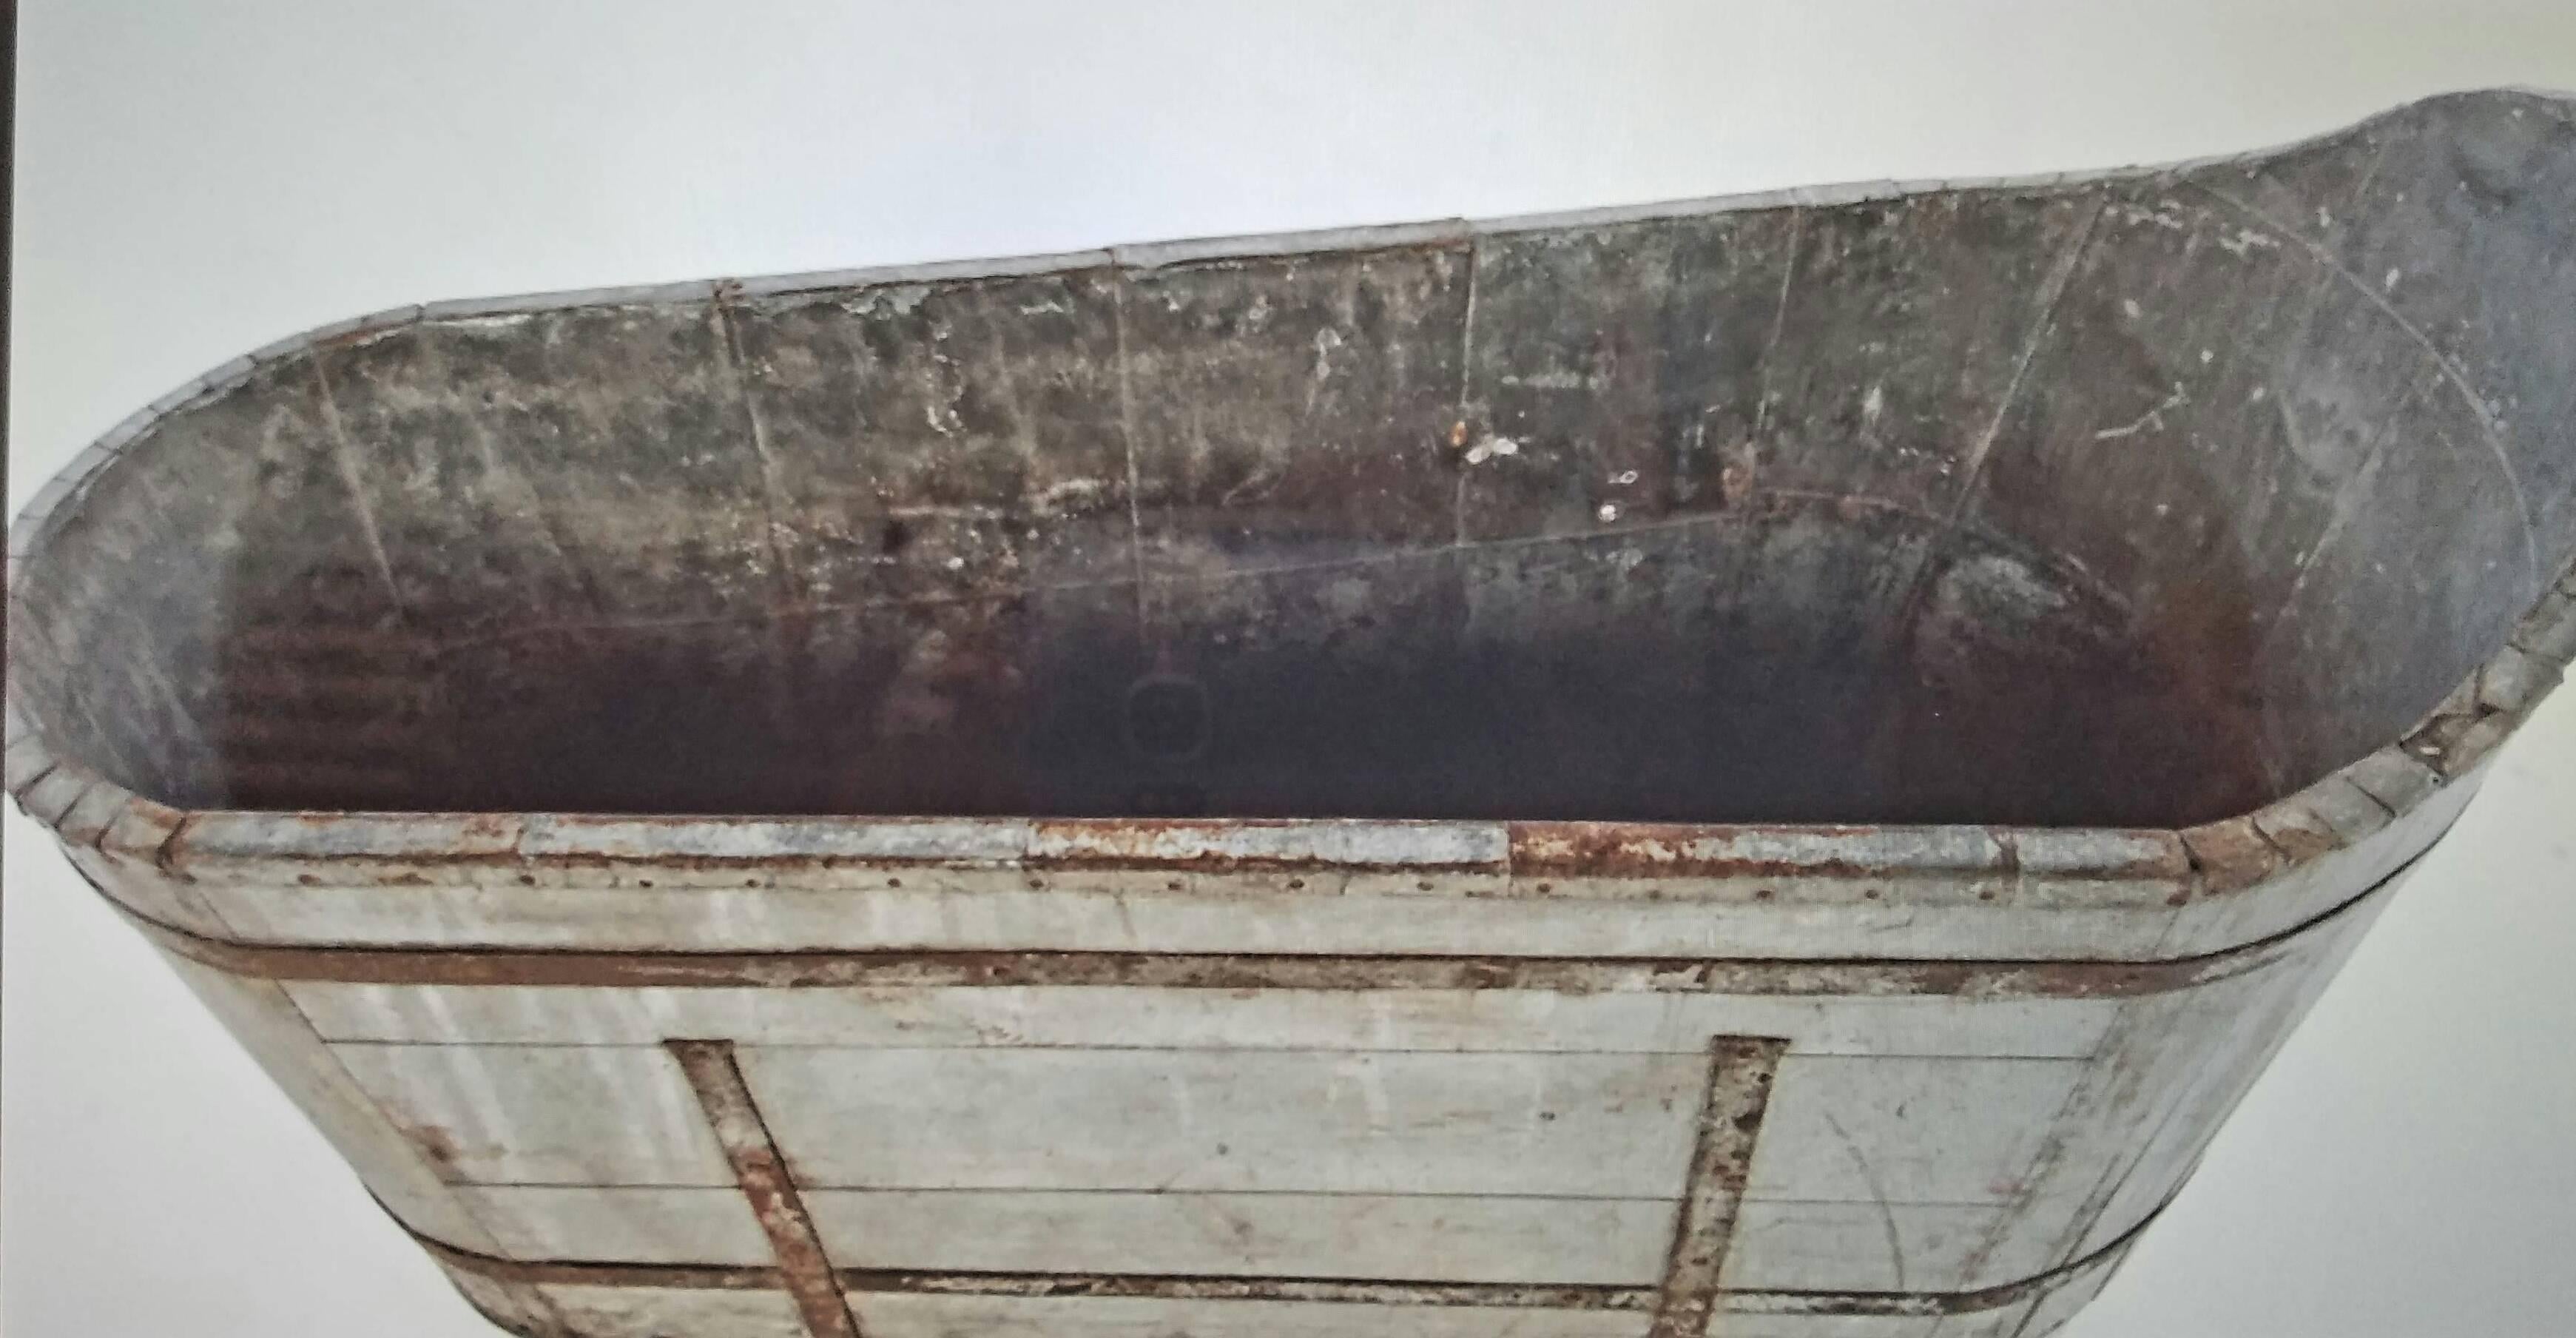 19th Century Antique French Wood Plank Tub with Metal Strap as Planter